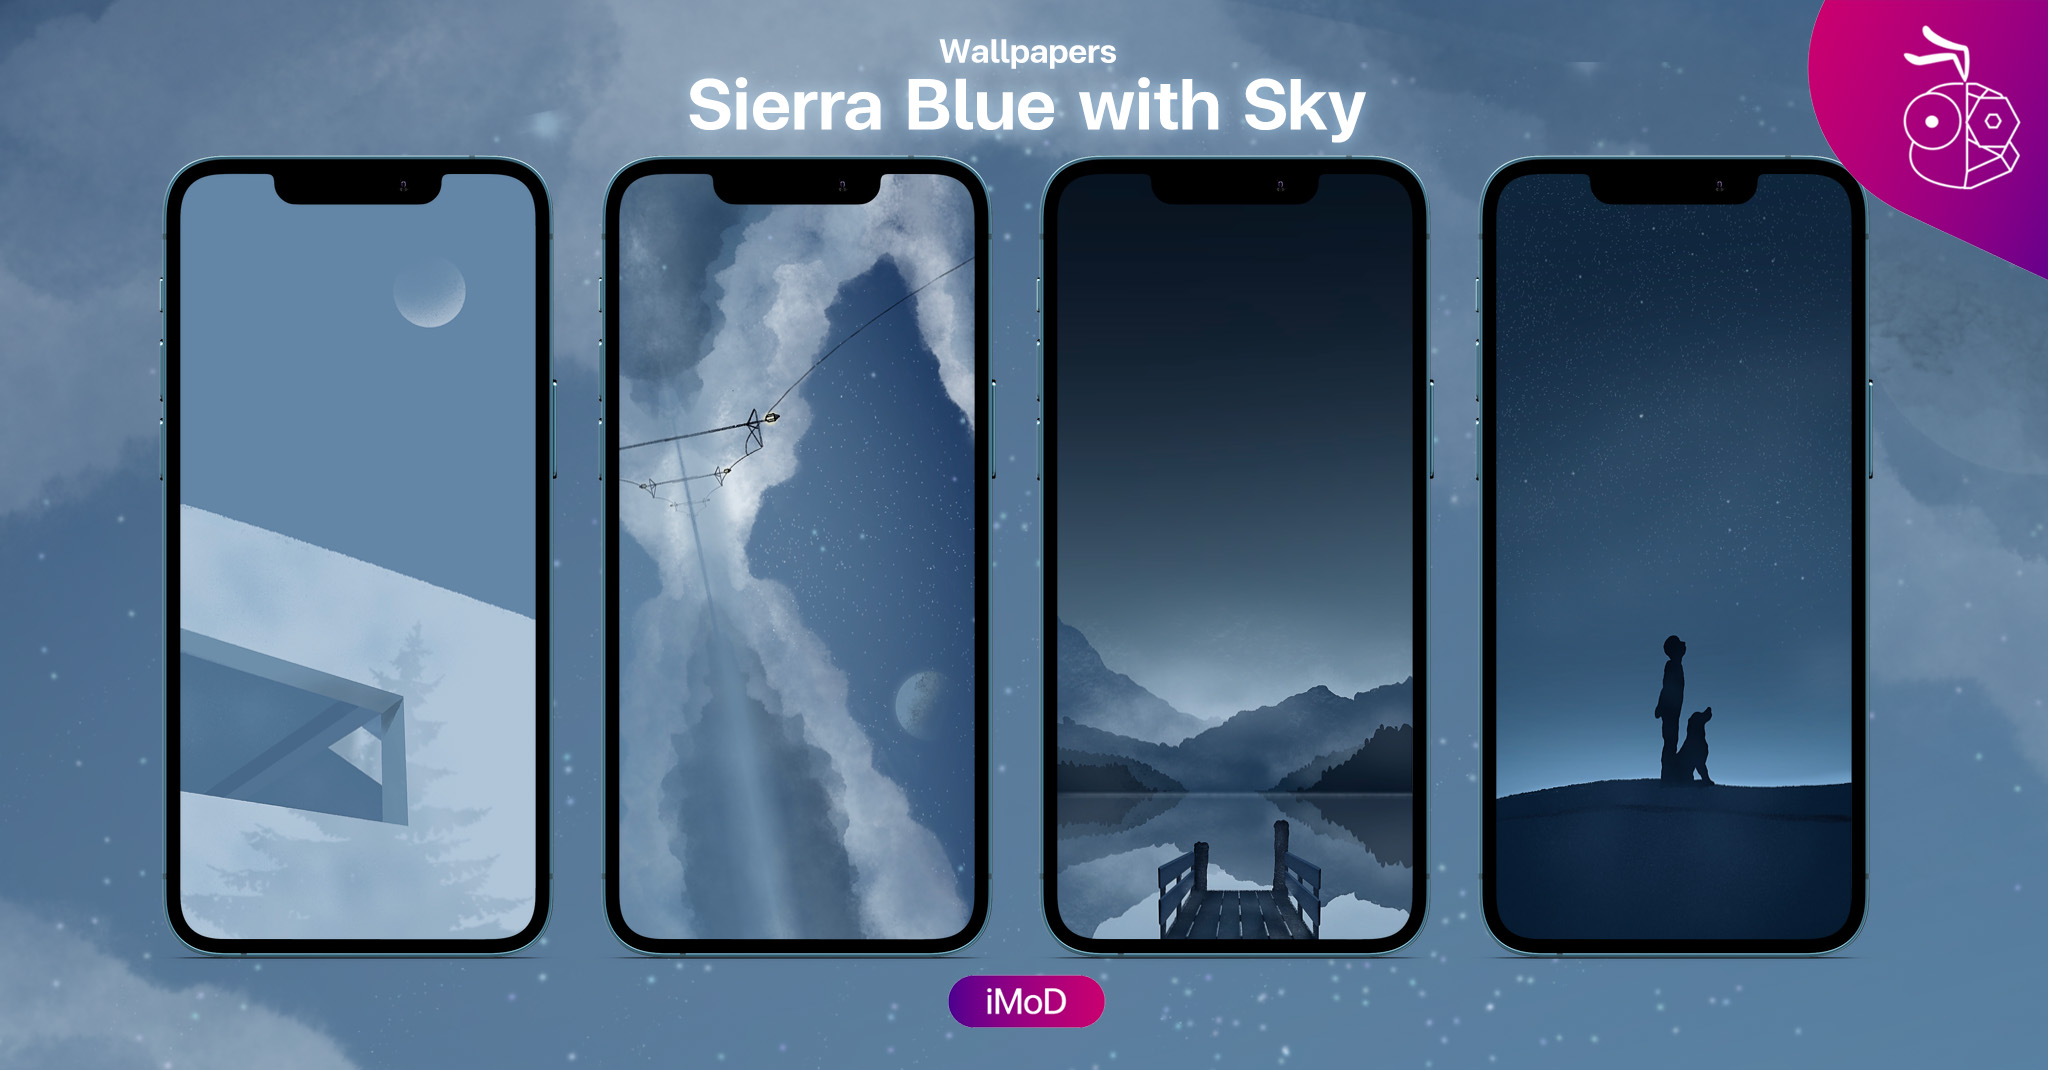 Inspired by the colors of the Sierra Blue wallpaper Its so simple  9GAG